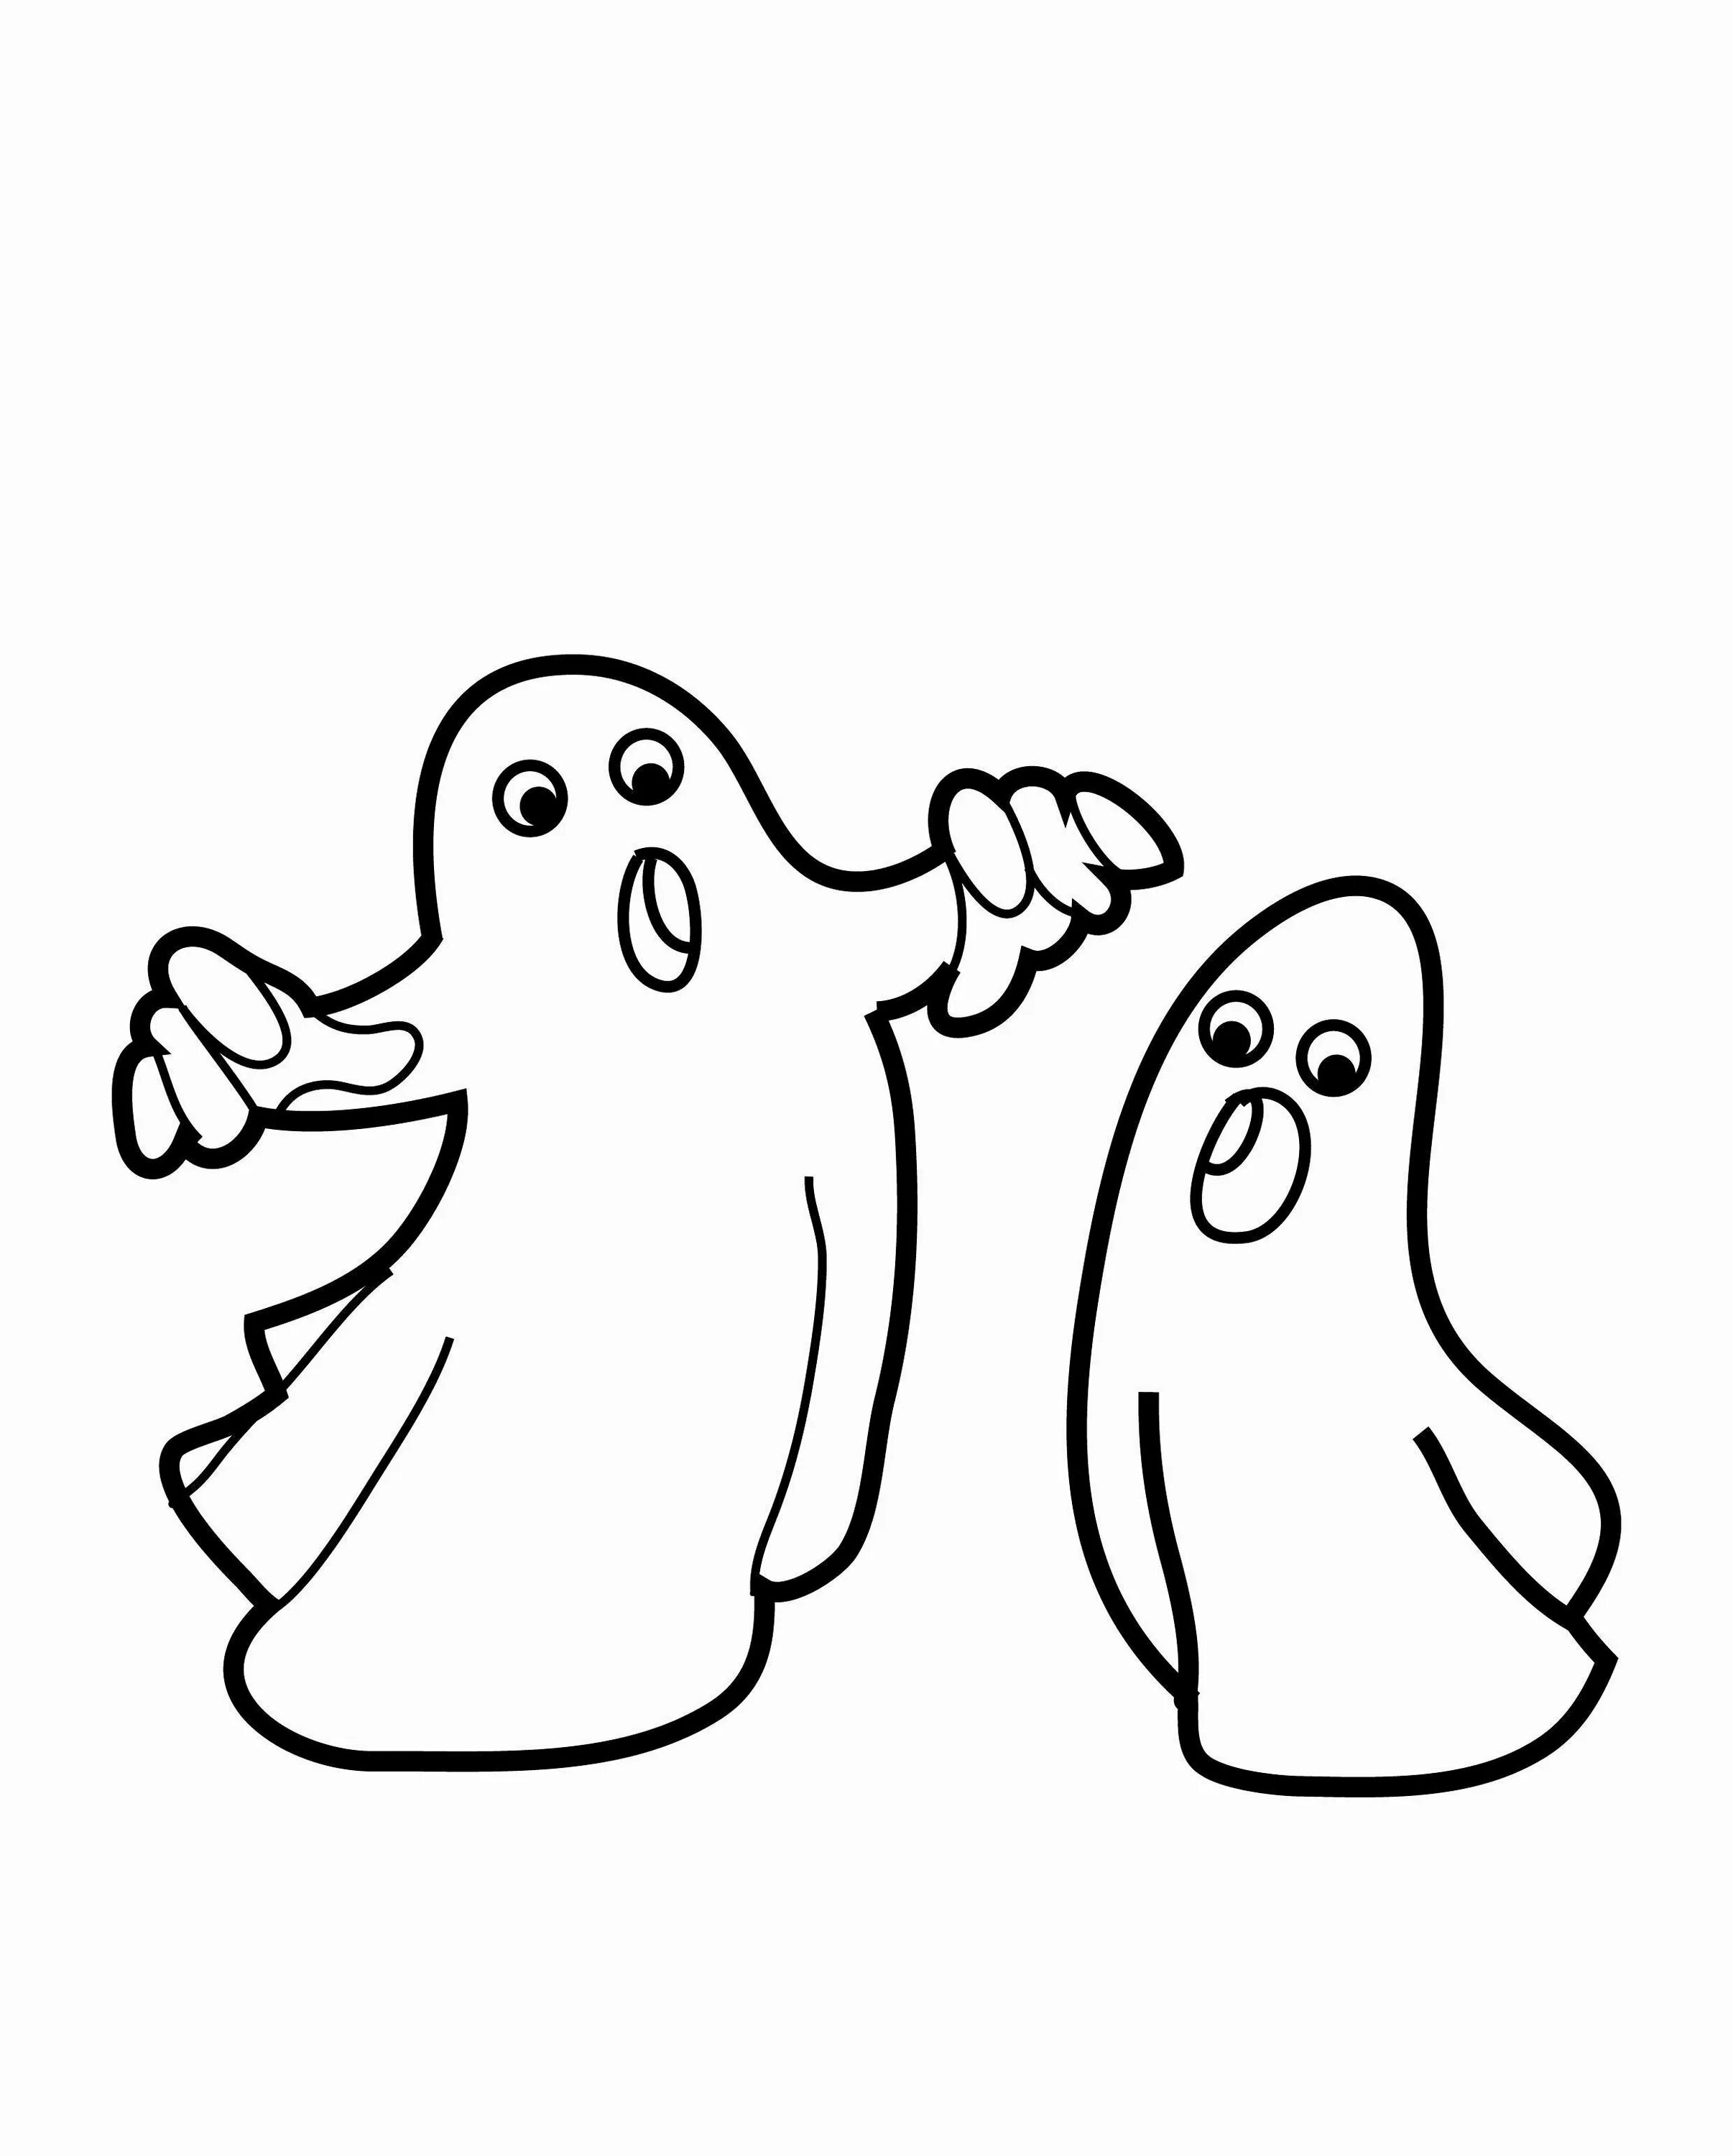 Ghost for kids #5